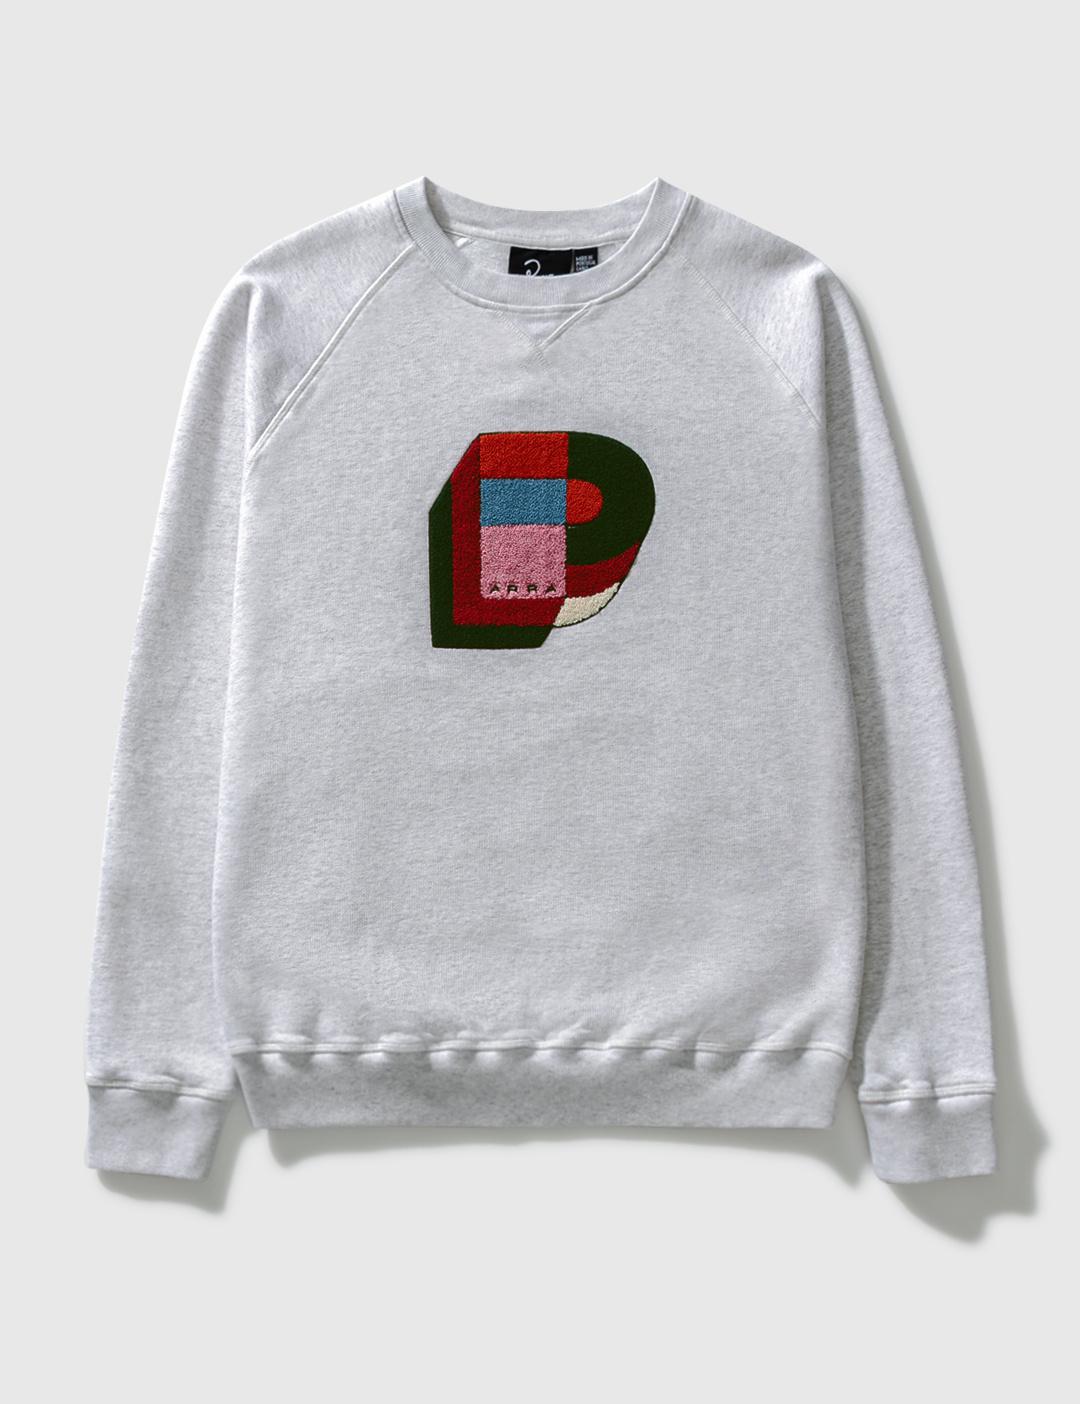 BUILDING BLOCK LOGO CREW NECK SWEAT-SHIRT by BY PARRA